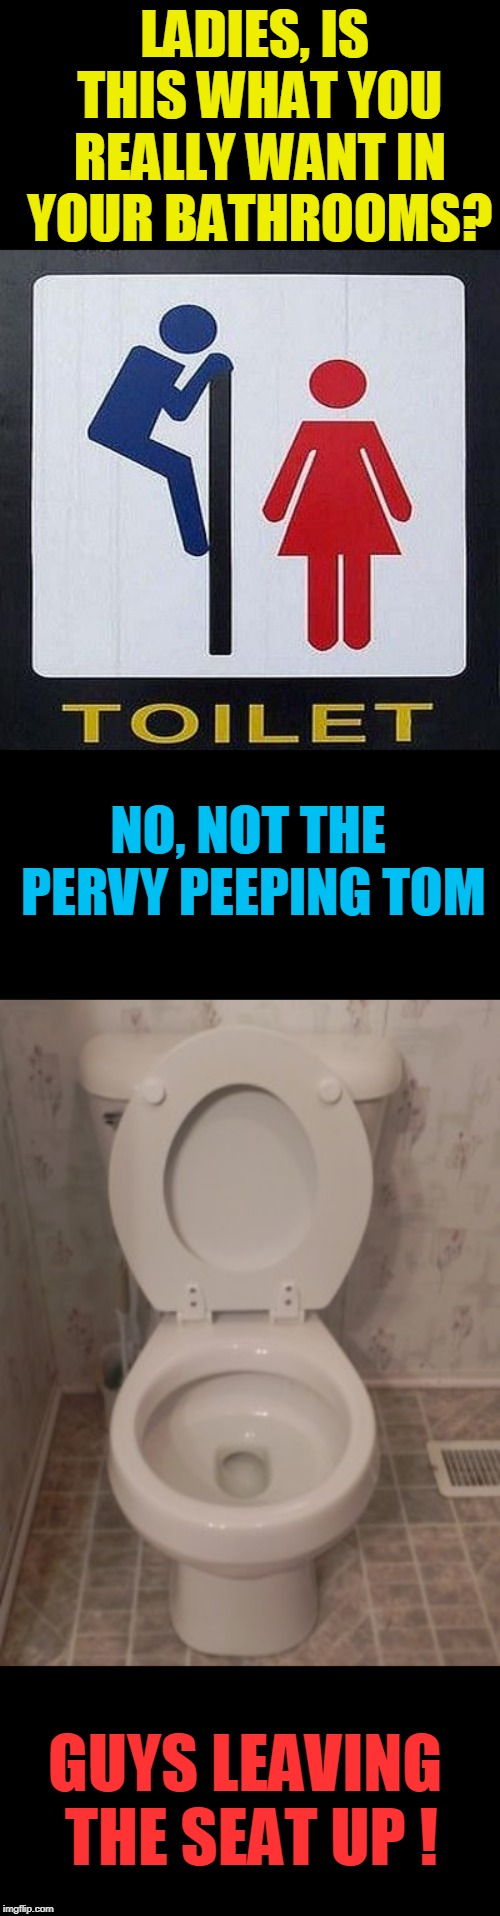 You asked for it. | LADIES, IS THIS WHAT YOU REALLY WANT IN YOUR BATHROOMS? NO, NOT THE PERVY PEEPING TOM; GUYS LEAVING THE SEAT UP ! | image tagged in toilet seat up,transgender bathrooms | made w/ Imgflip meme maker